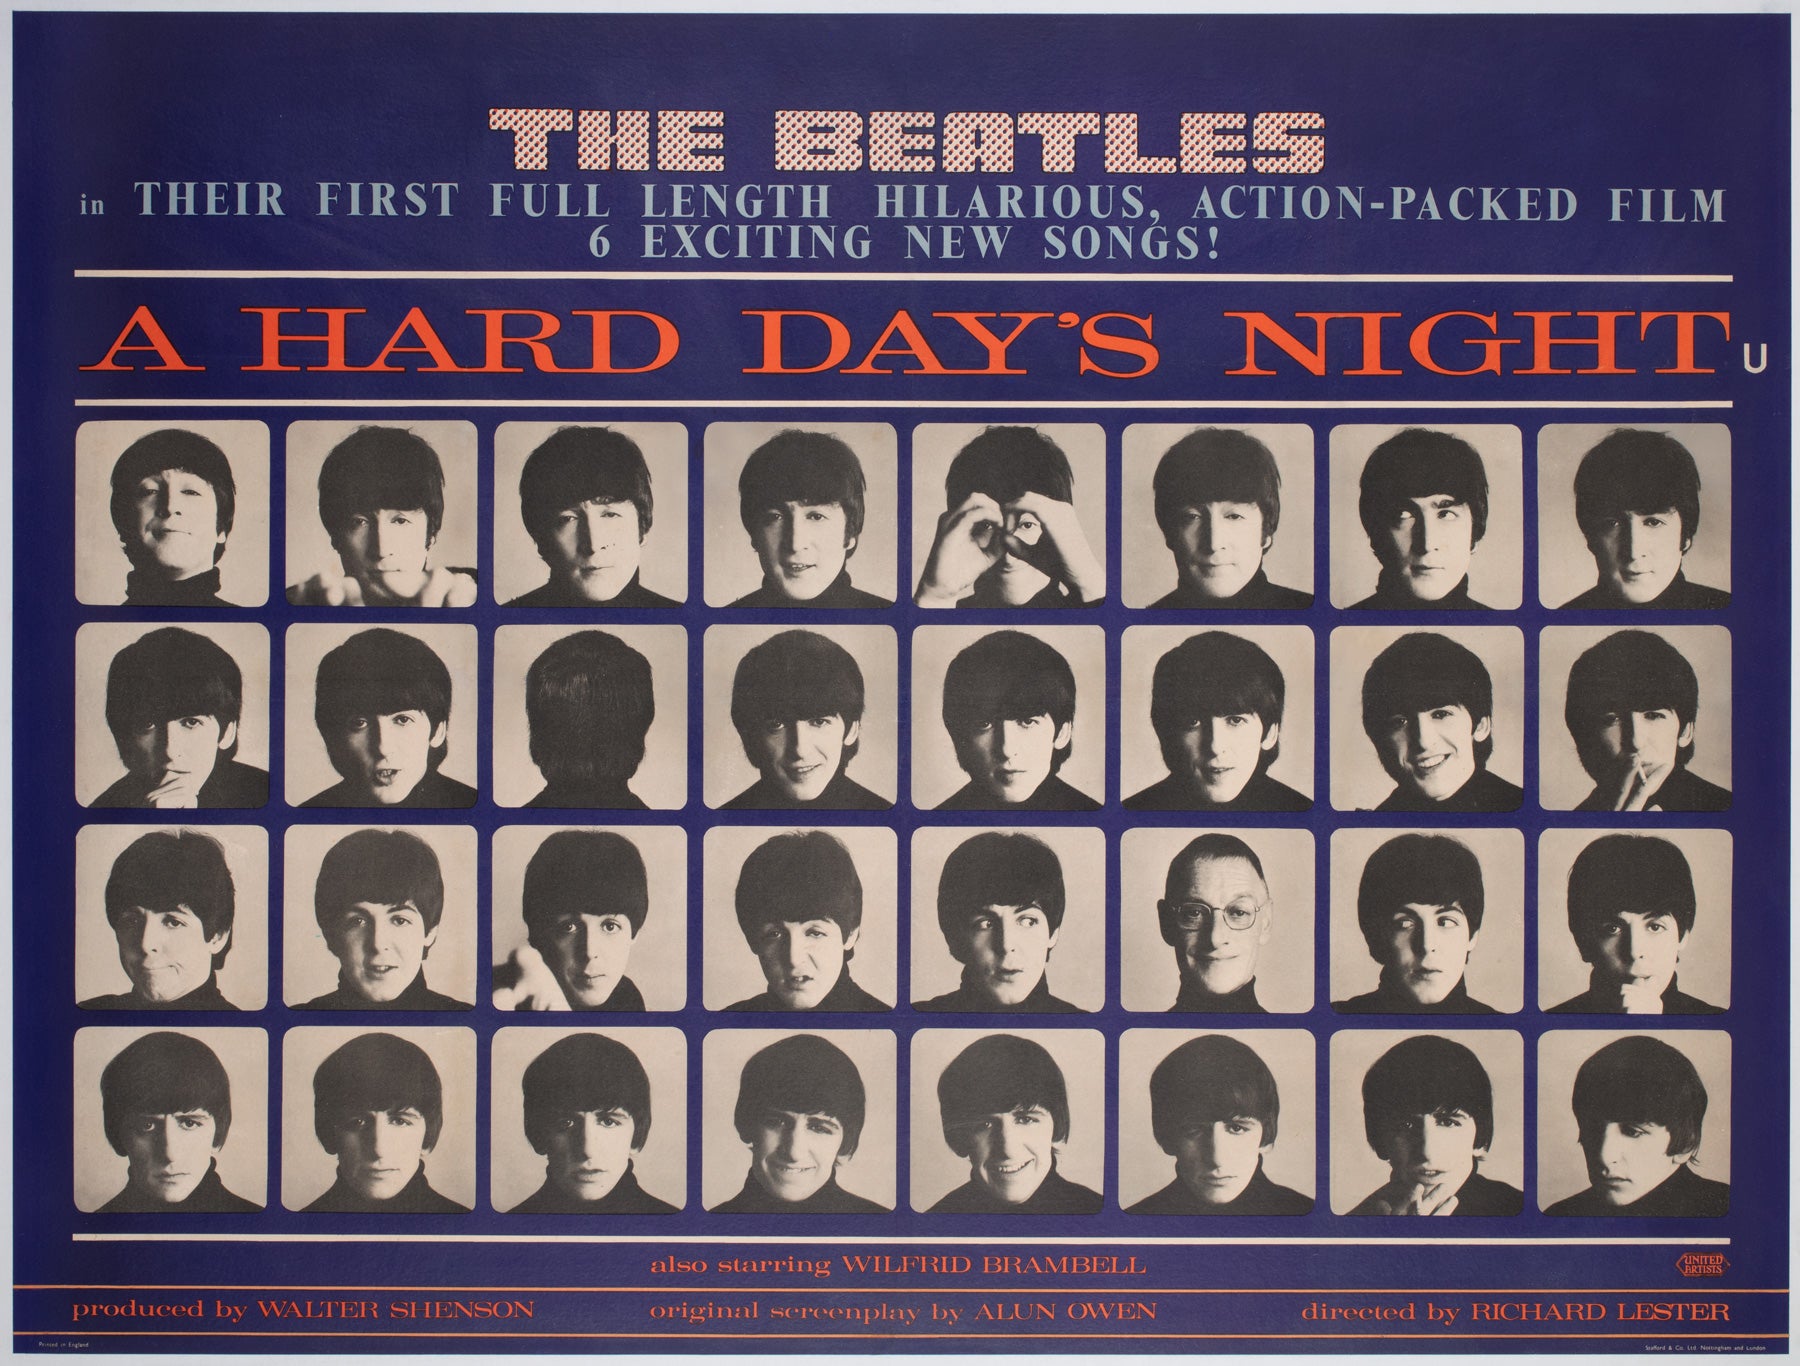 A Hard Day's Night 1964 UK Quad Film Movie Poster, The Beatles